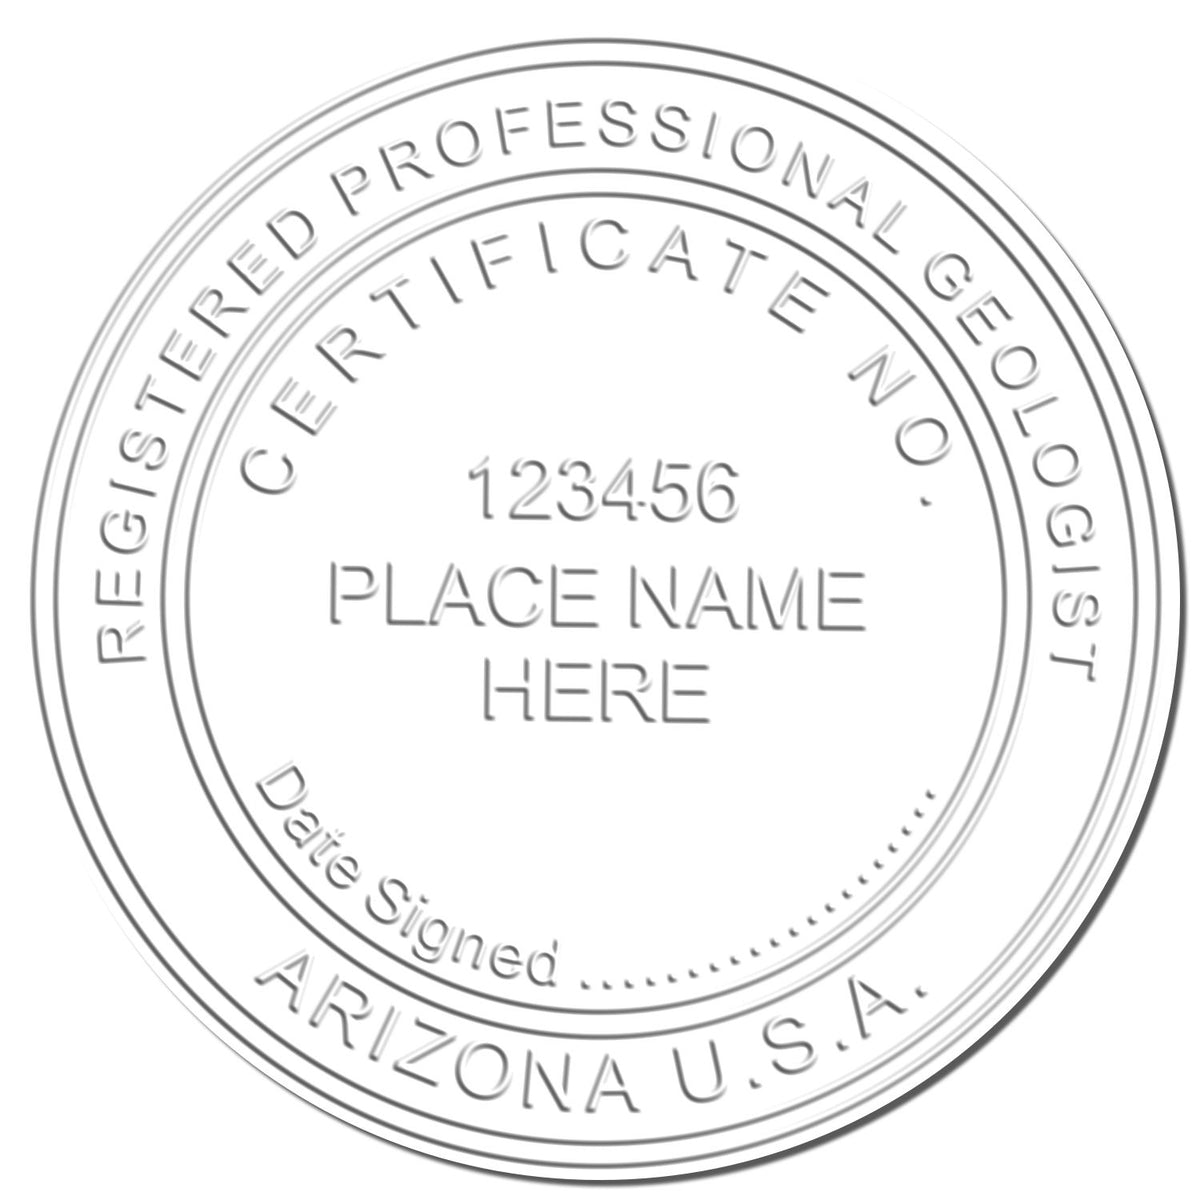 A photograph of the Hybrid Arizona Geologist Seal stamp impression reveals a vivid, professional image of the on paper.